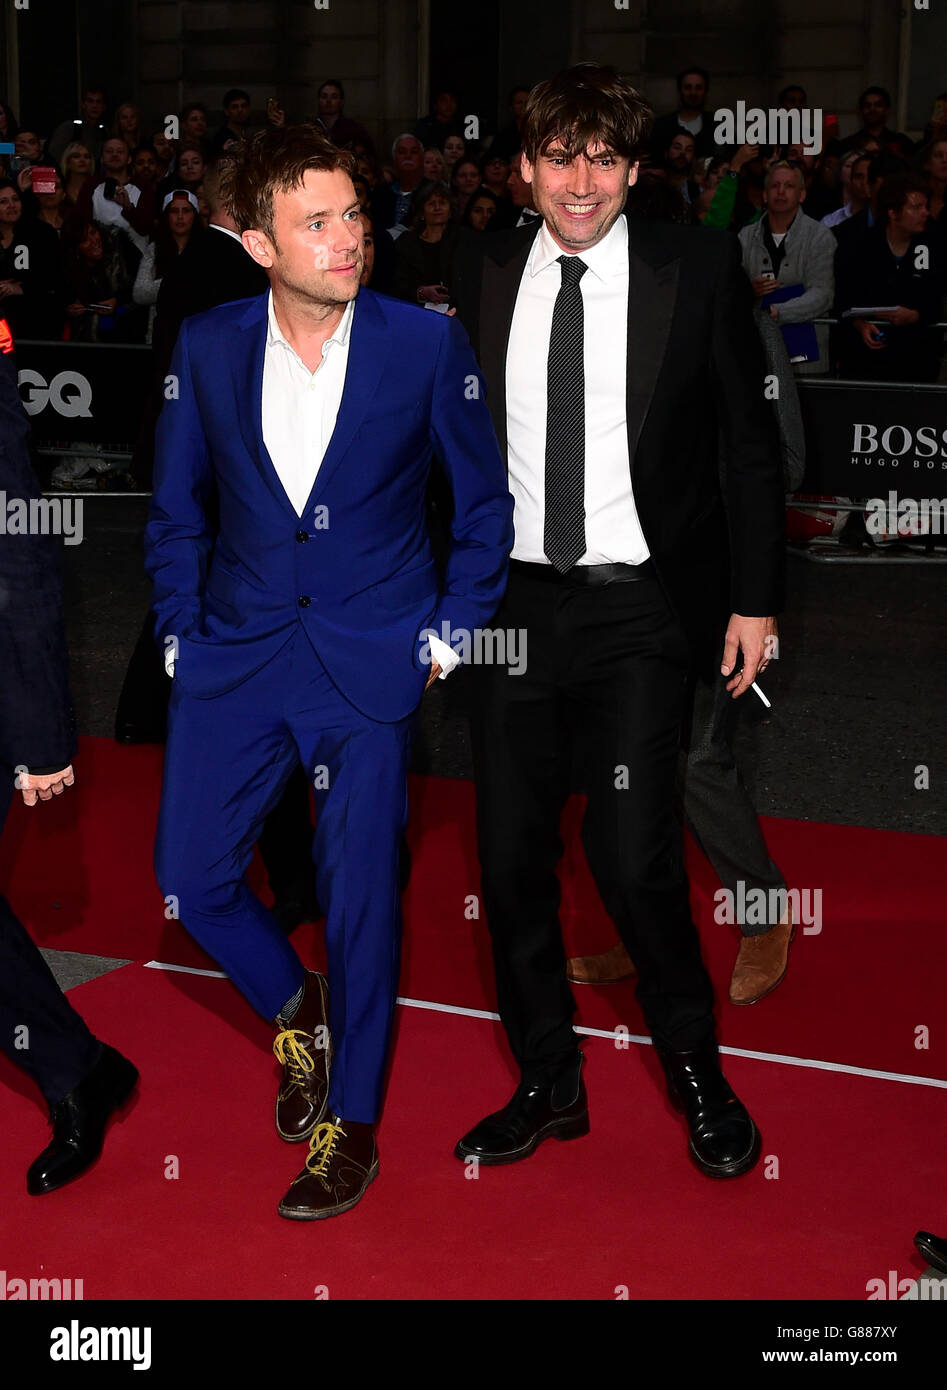 Blur's Damon Albarn and Alex James (right) attending the 2015 GQ Men of the Year Awards at the Royal Opera House, London. PRESS ASSOCIATION Photo. Picture date: Tuesday September 8, 2015. See PA story SHOWBIZ GQ. Photo credit should read: Ian West/PA Wire Stock Photo